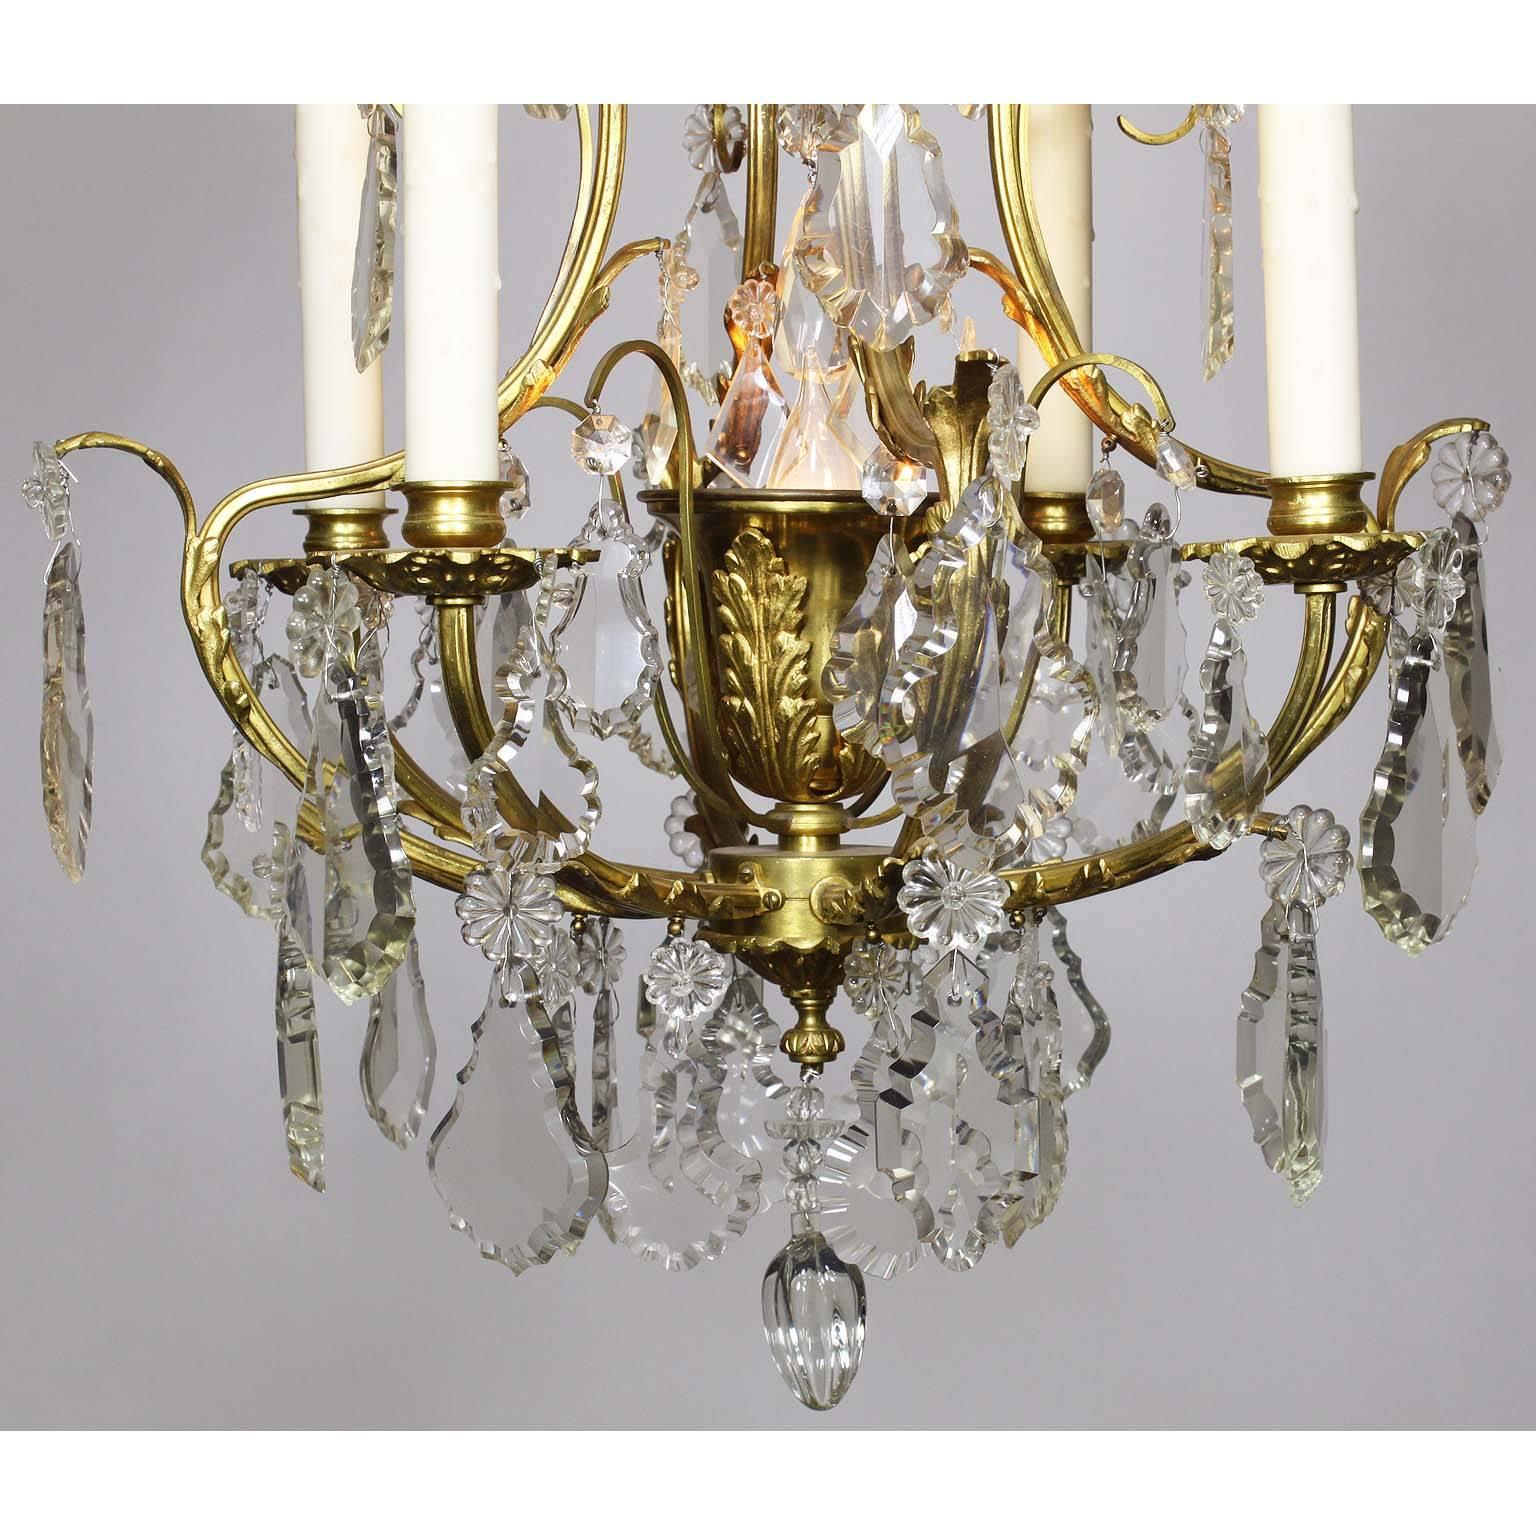 Carved French Louis XV Style Gilt Bronze and Cut-Glass Foyer or Bedroom Chandelier For Sale